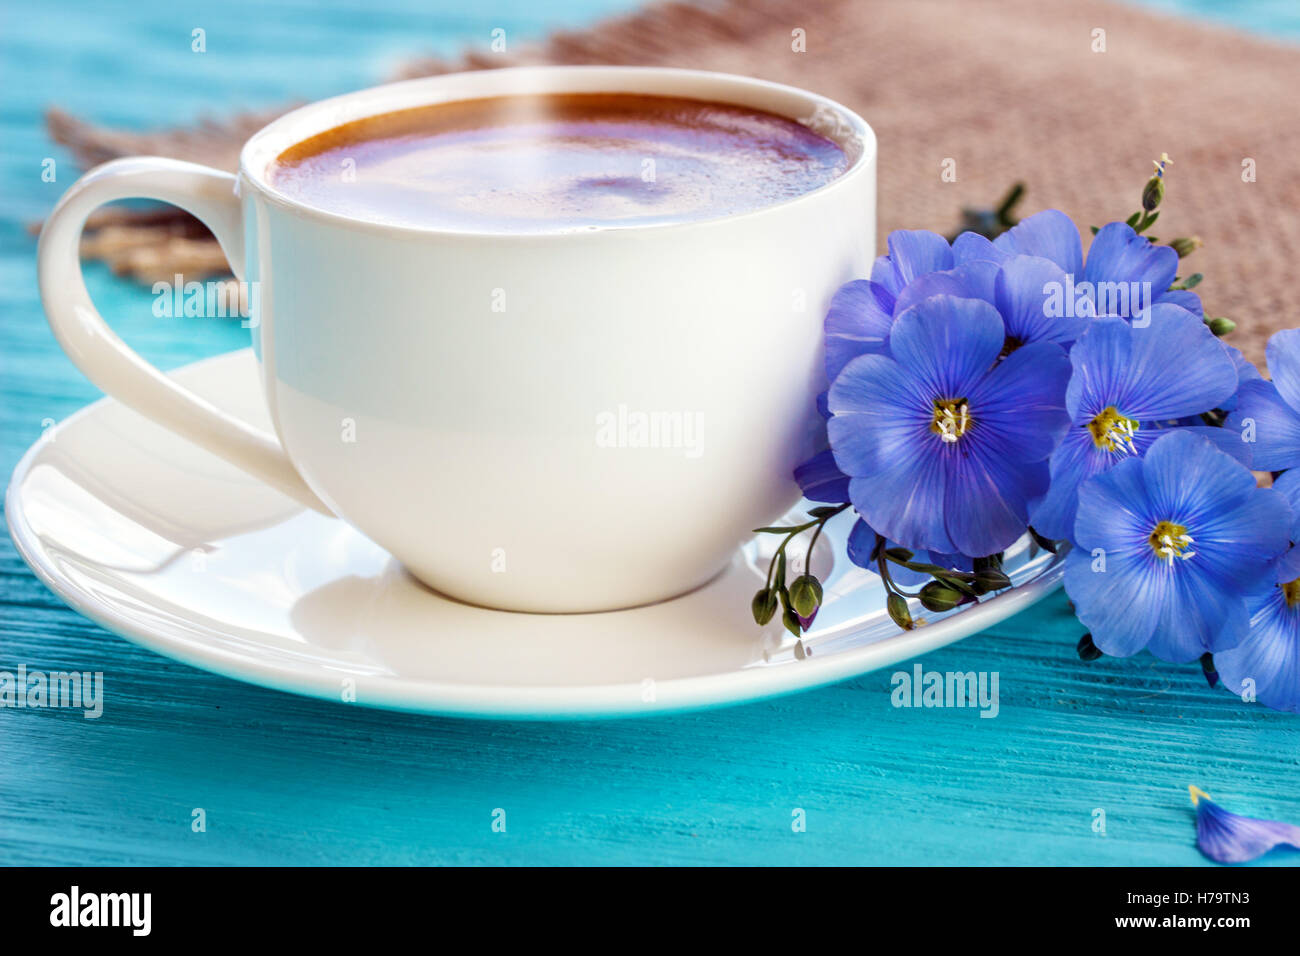 Coffee mug with white flowers and notes good morning on blue rustic table from above, breakfast Stock Photo